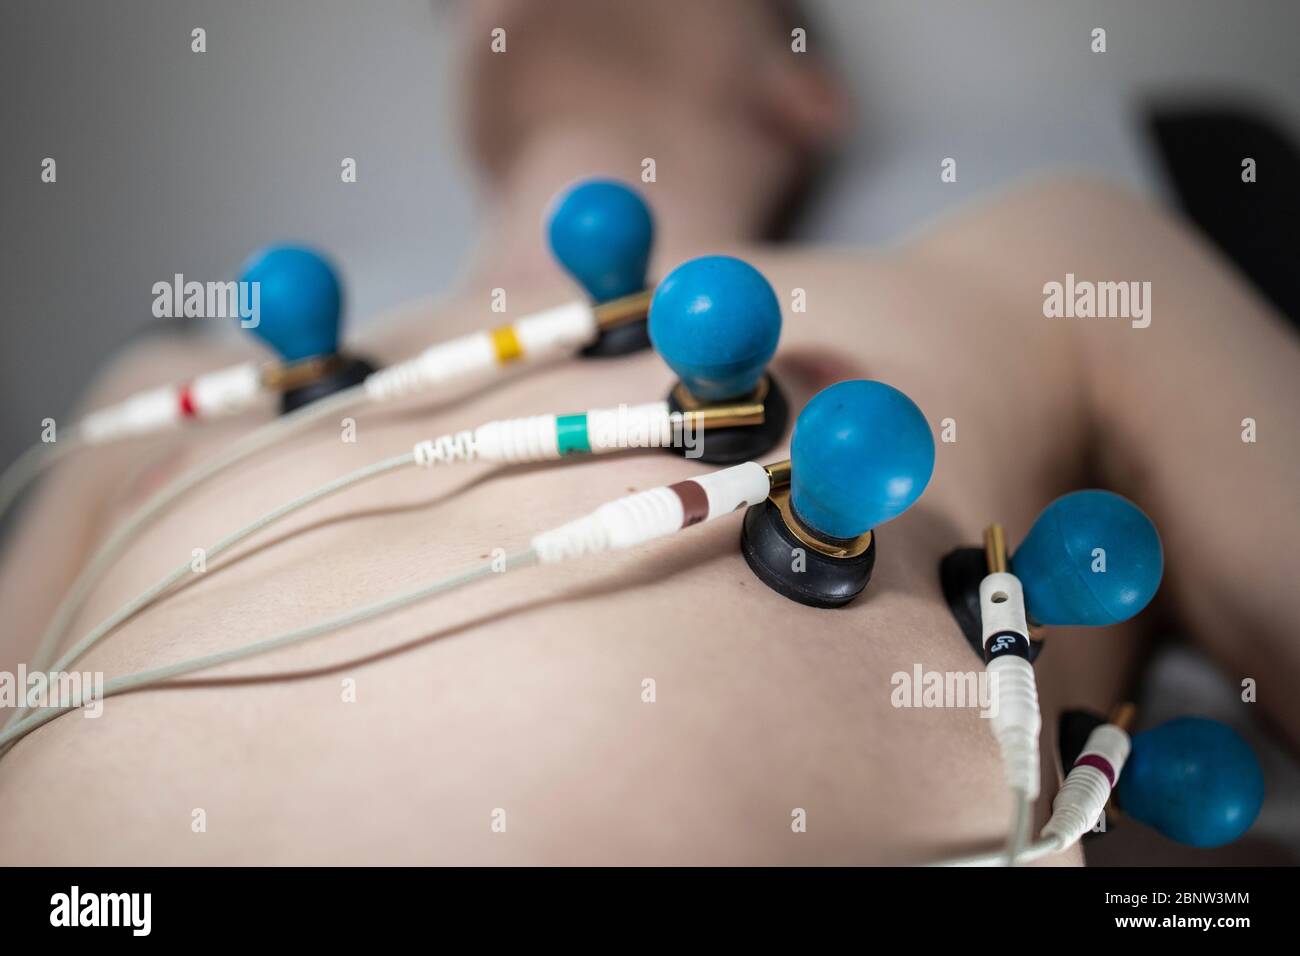 A patient with EKG electrodes attached to his body. Stock Photo